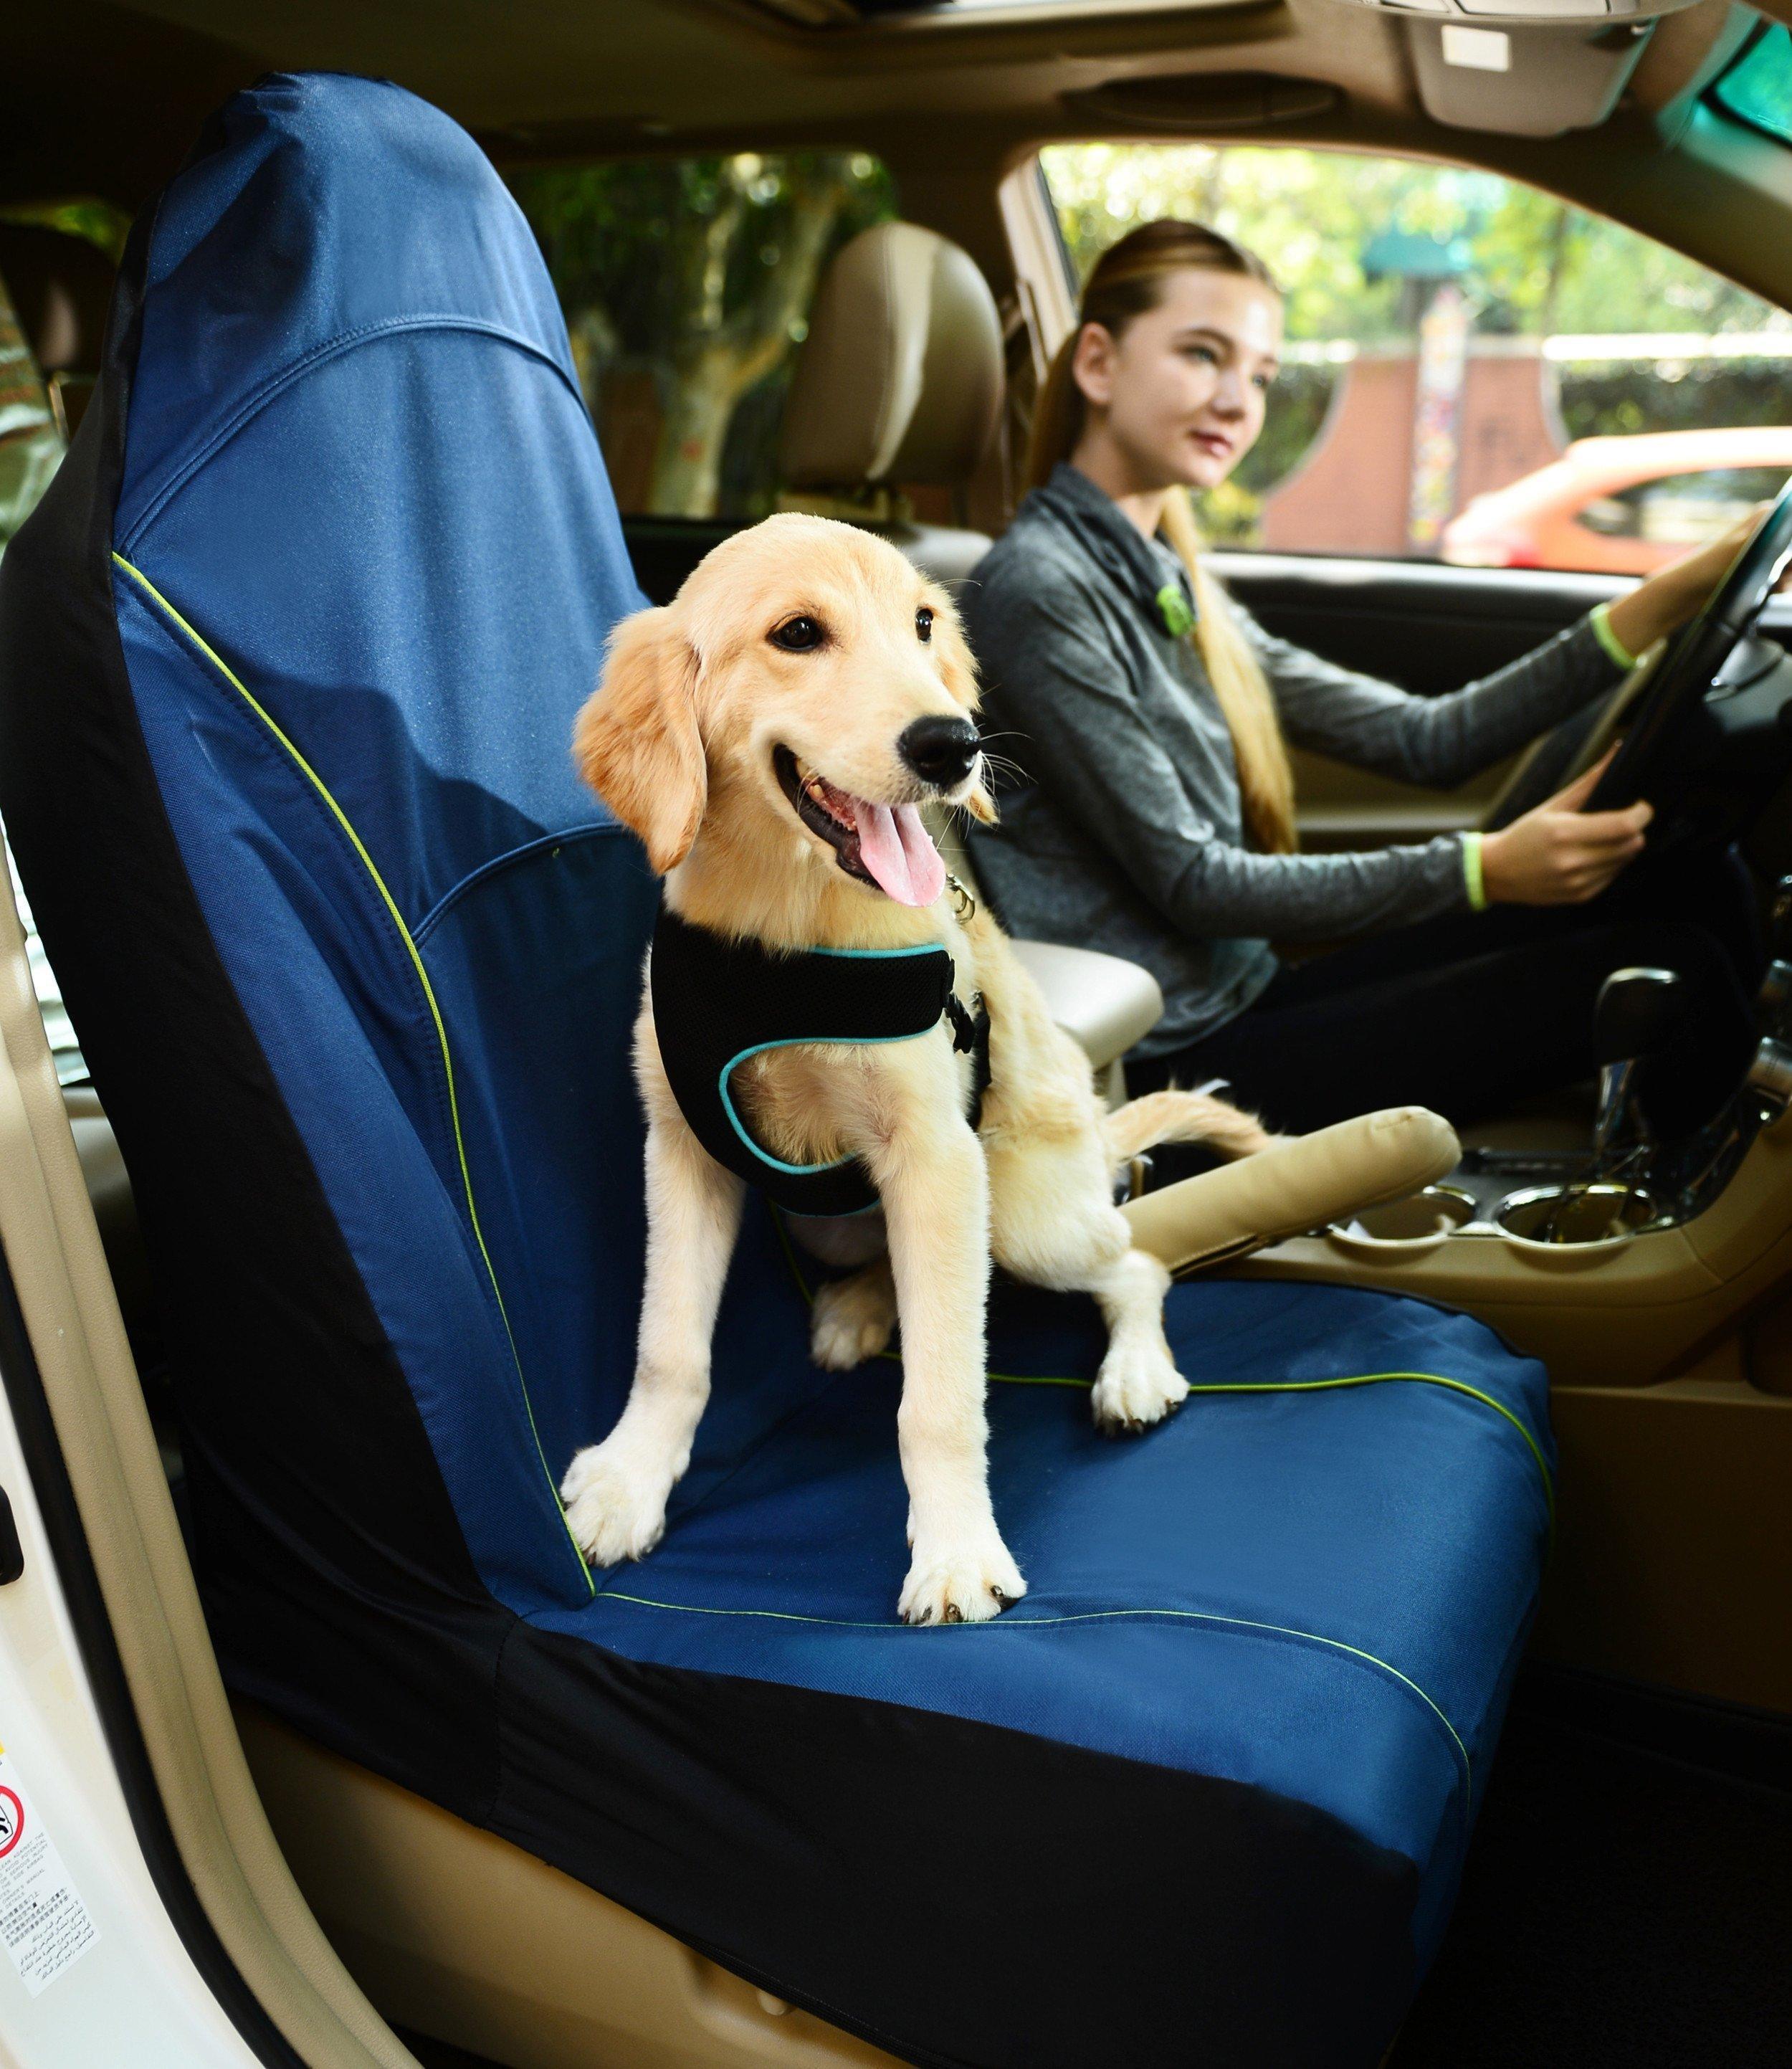 Pet Life ® 'Open Road' Single Seated Safety Child Pet Cat Dog Car Seat Carseat Cover Protector Blue 